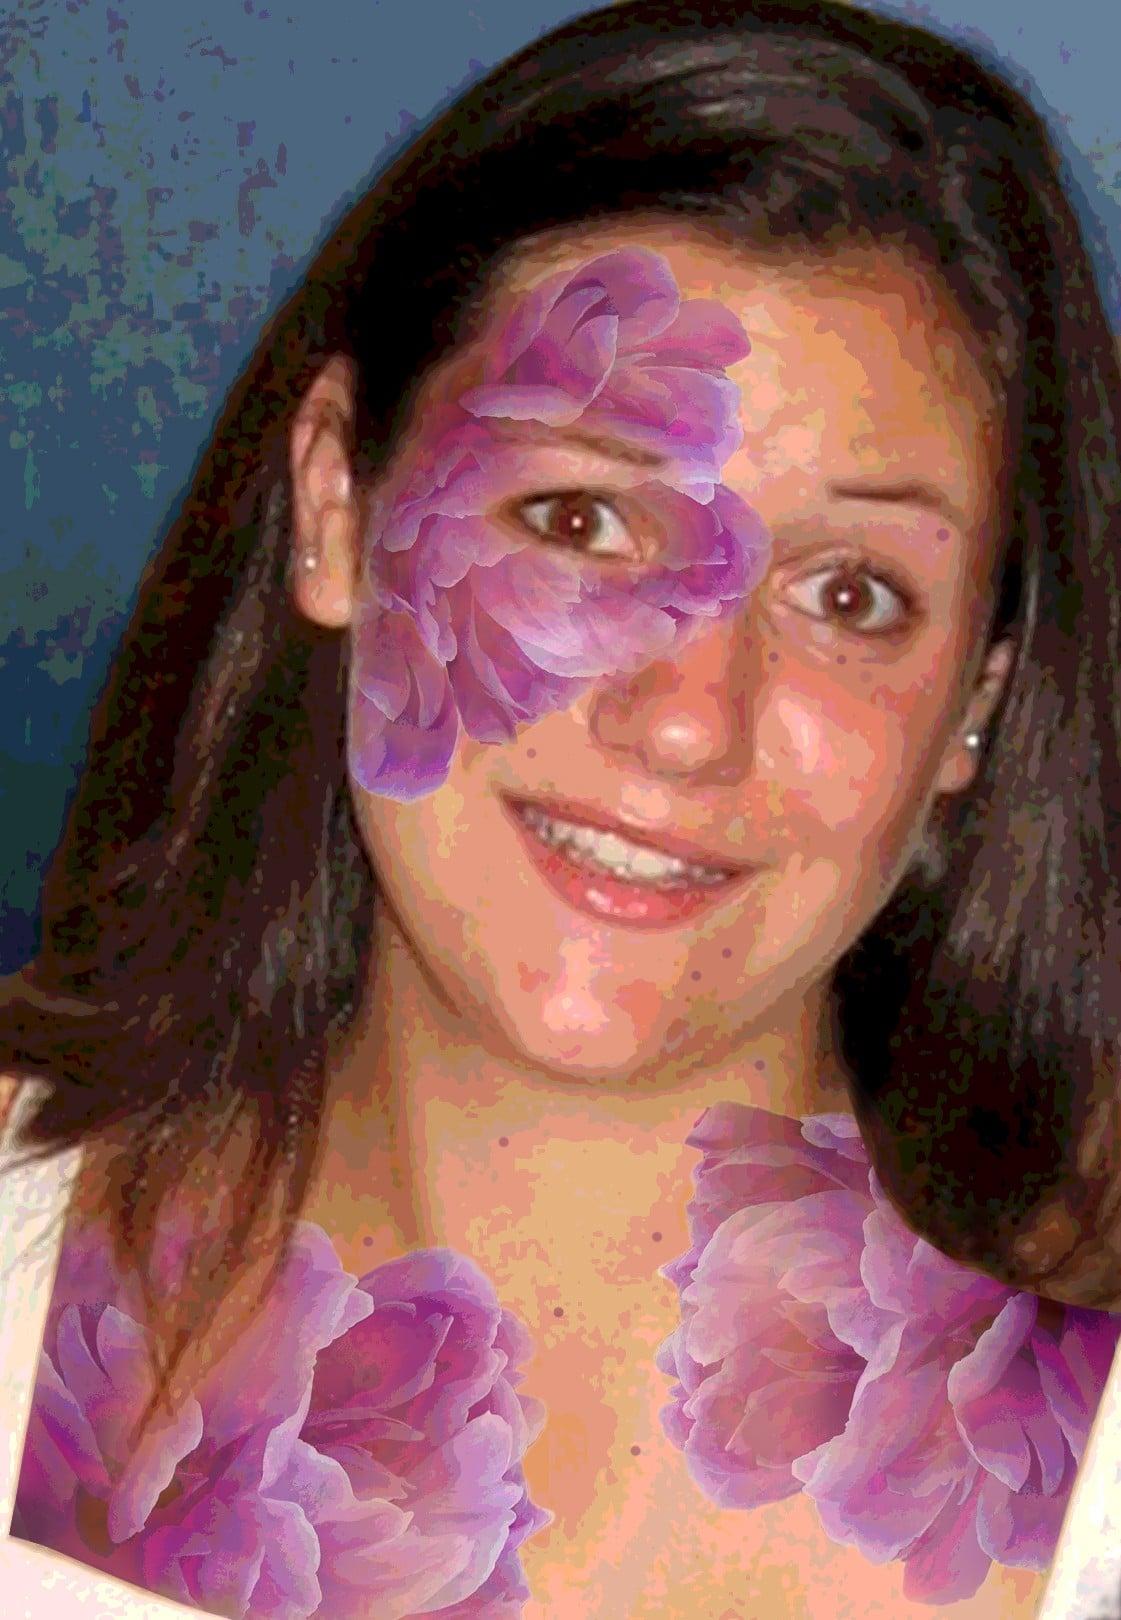 Robin Botie of ithaca, New York, photoshops purple bruises big as peonies on her daughter who died of leukemia.